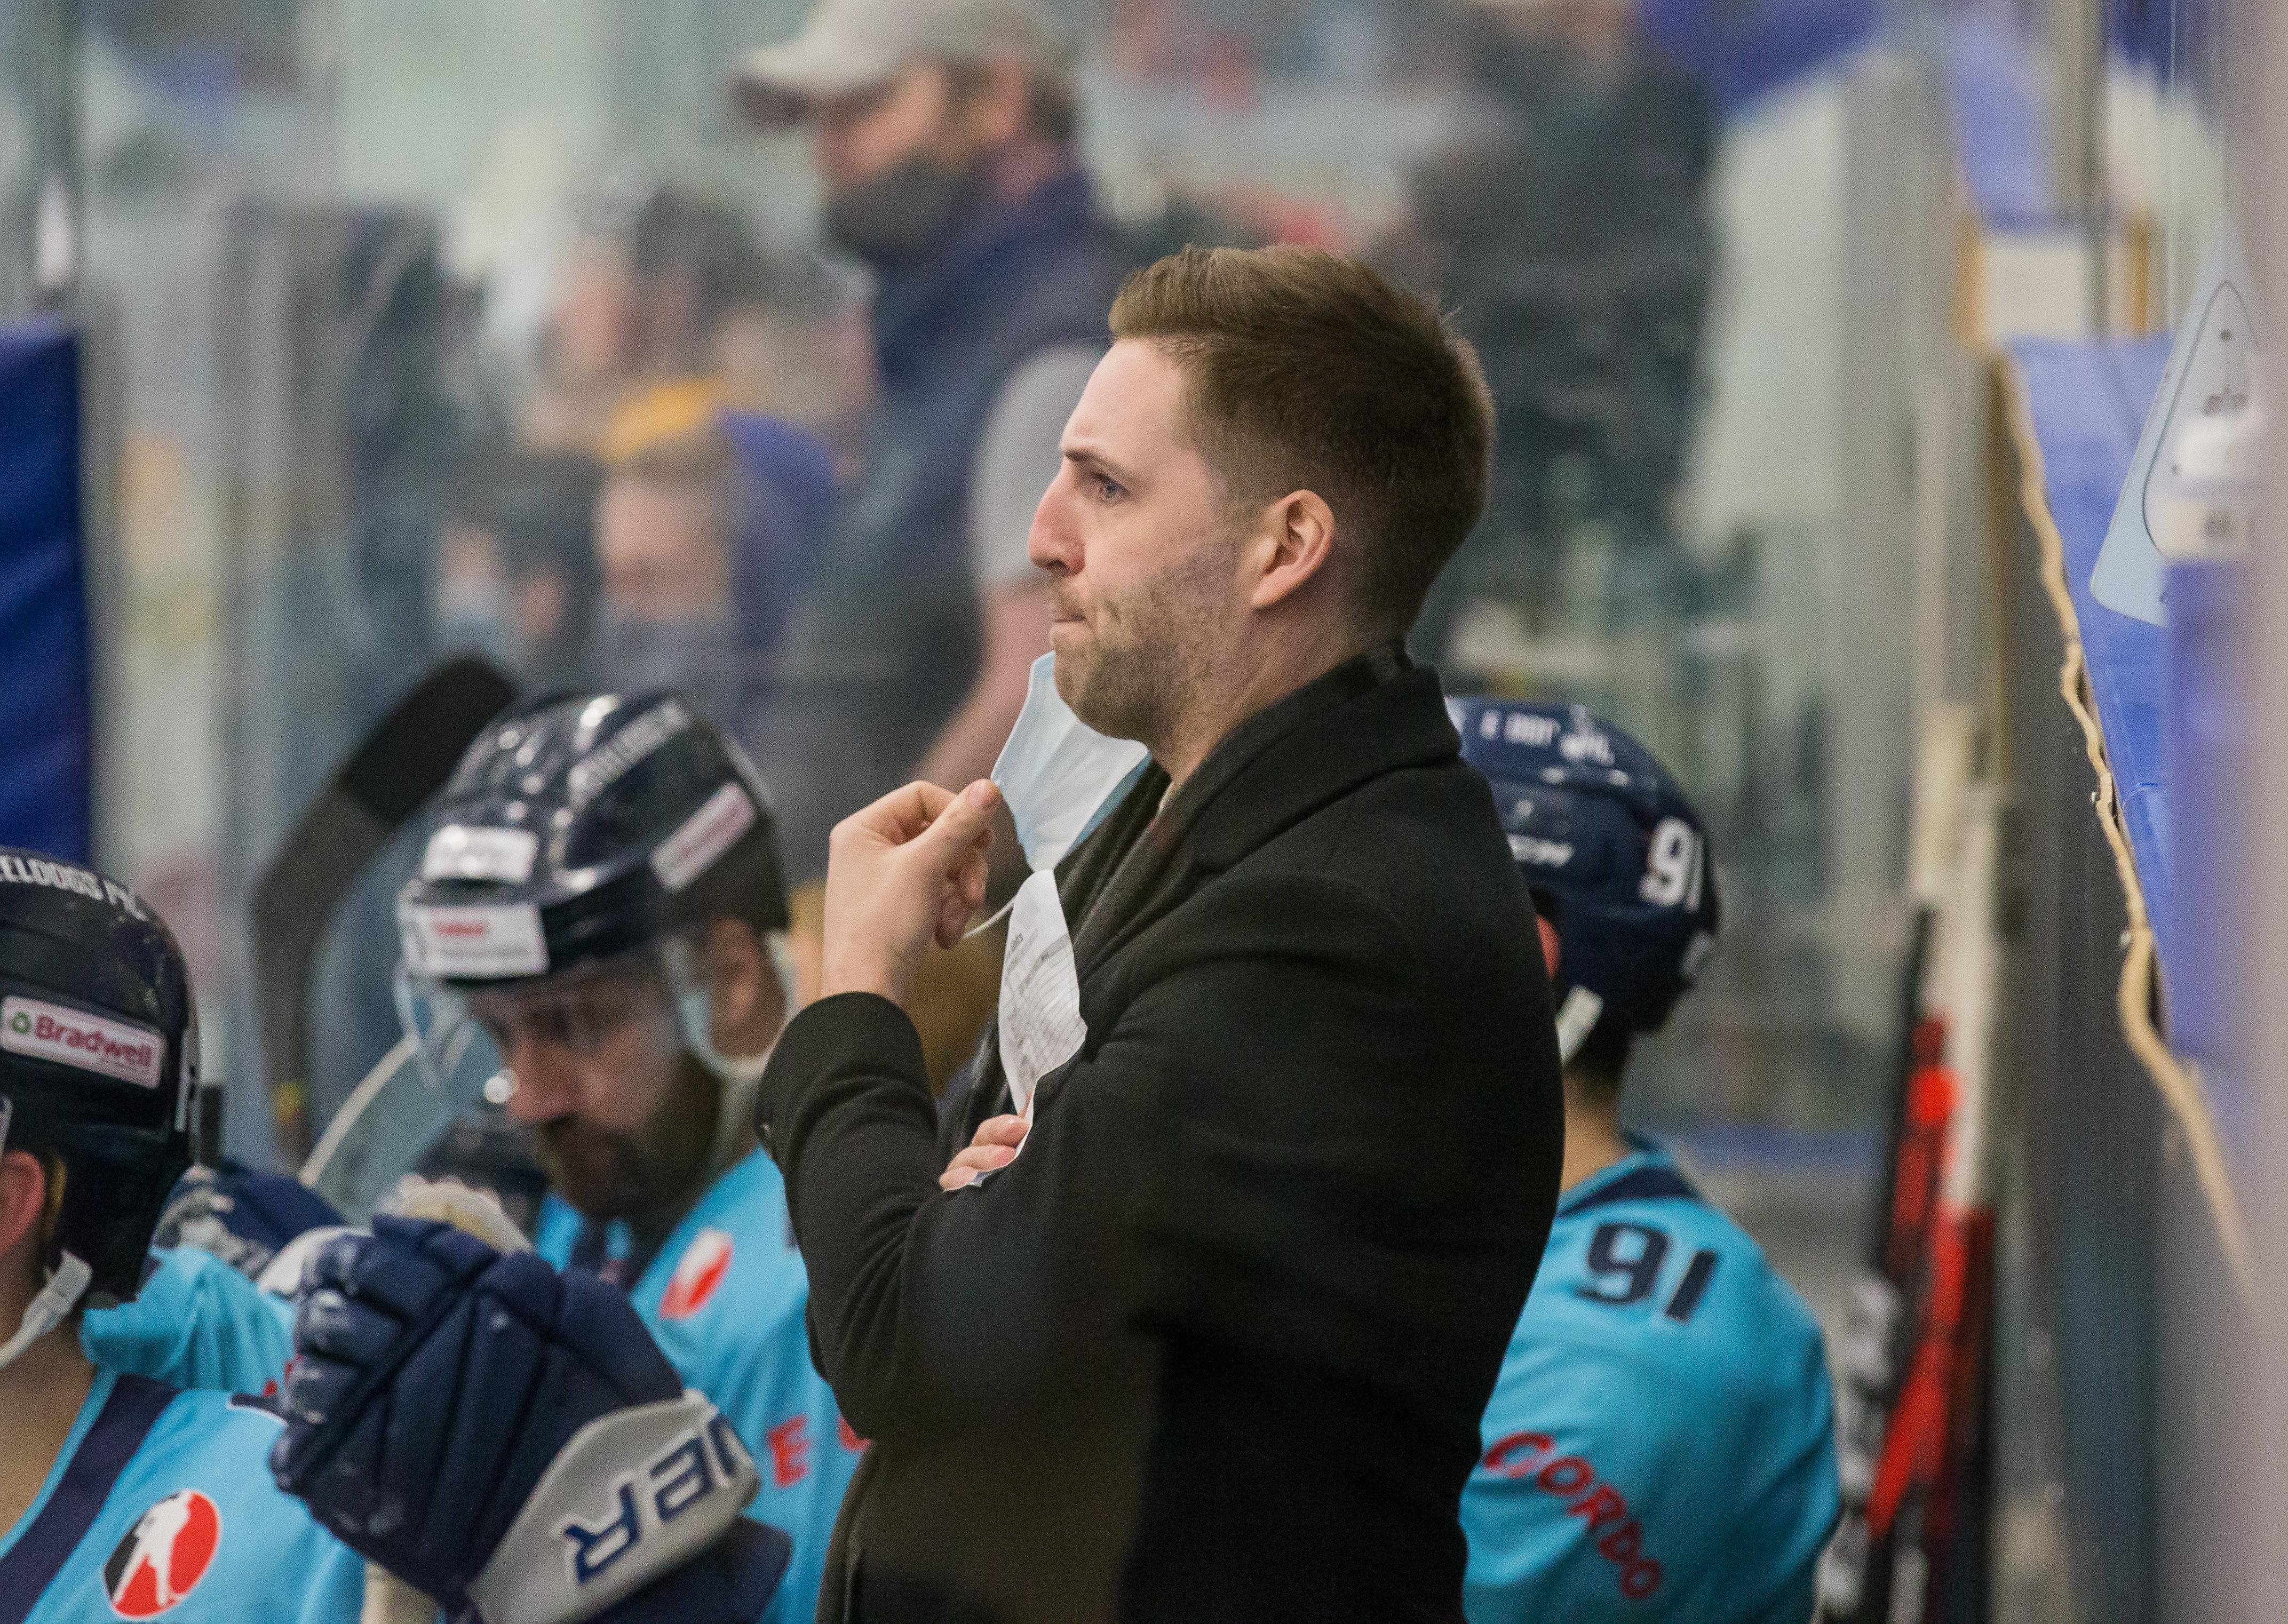 Sheffield Steeldogs coach Greg Wood relishing pivotal Spring Cup battle with Telford Tigers